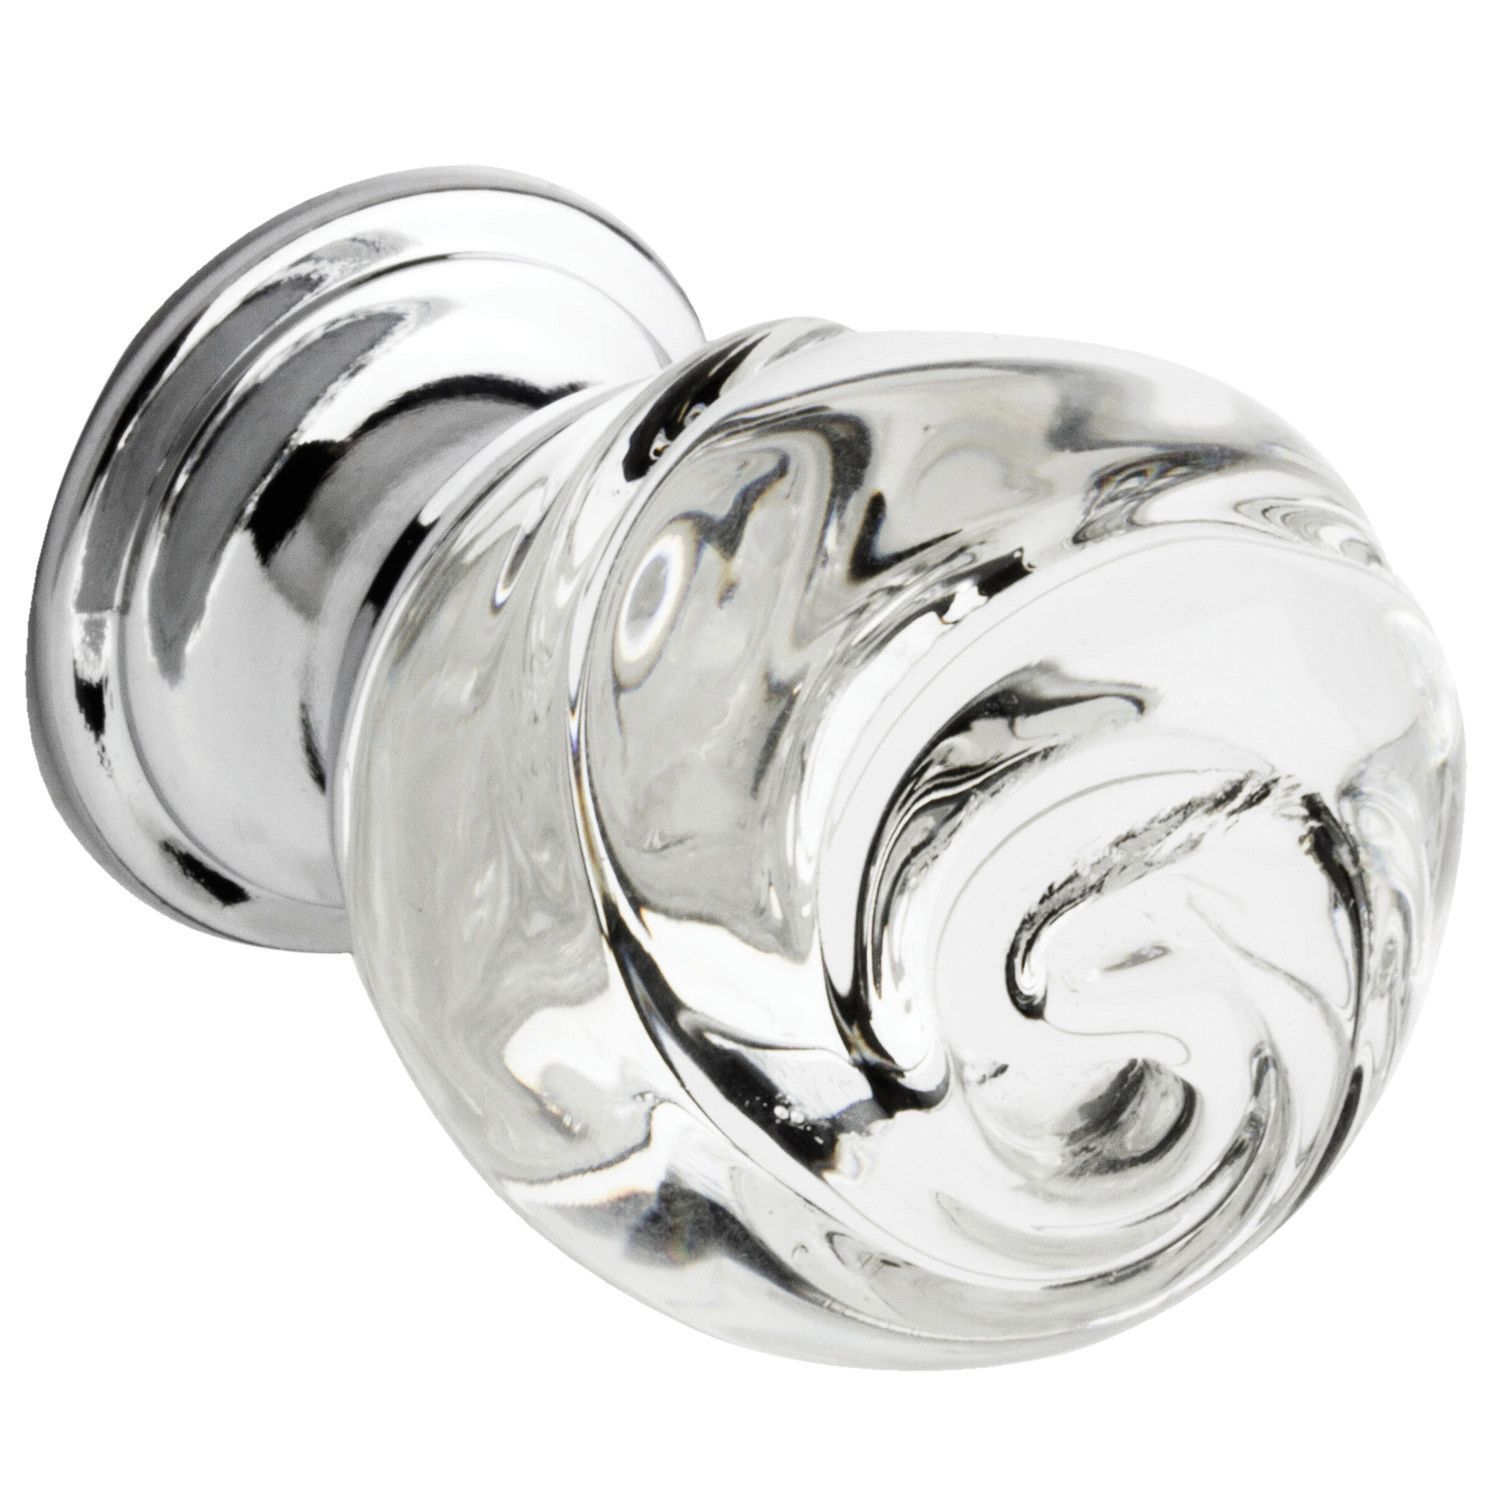 Image of Wickes Rose Shaped Glass Door Knob - Chrome 30mm Pack of 4